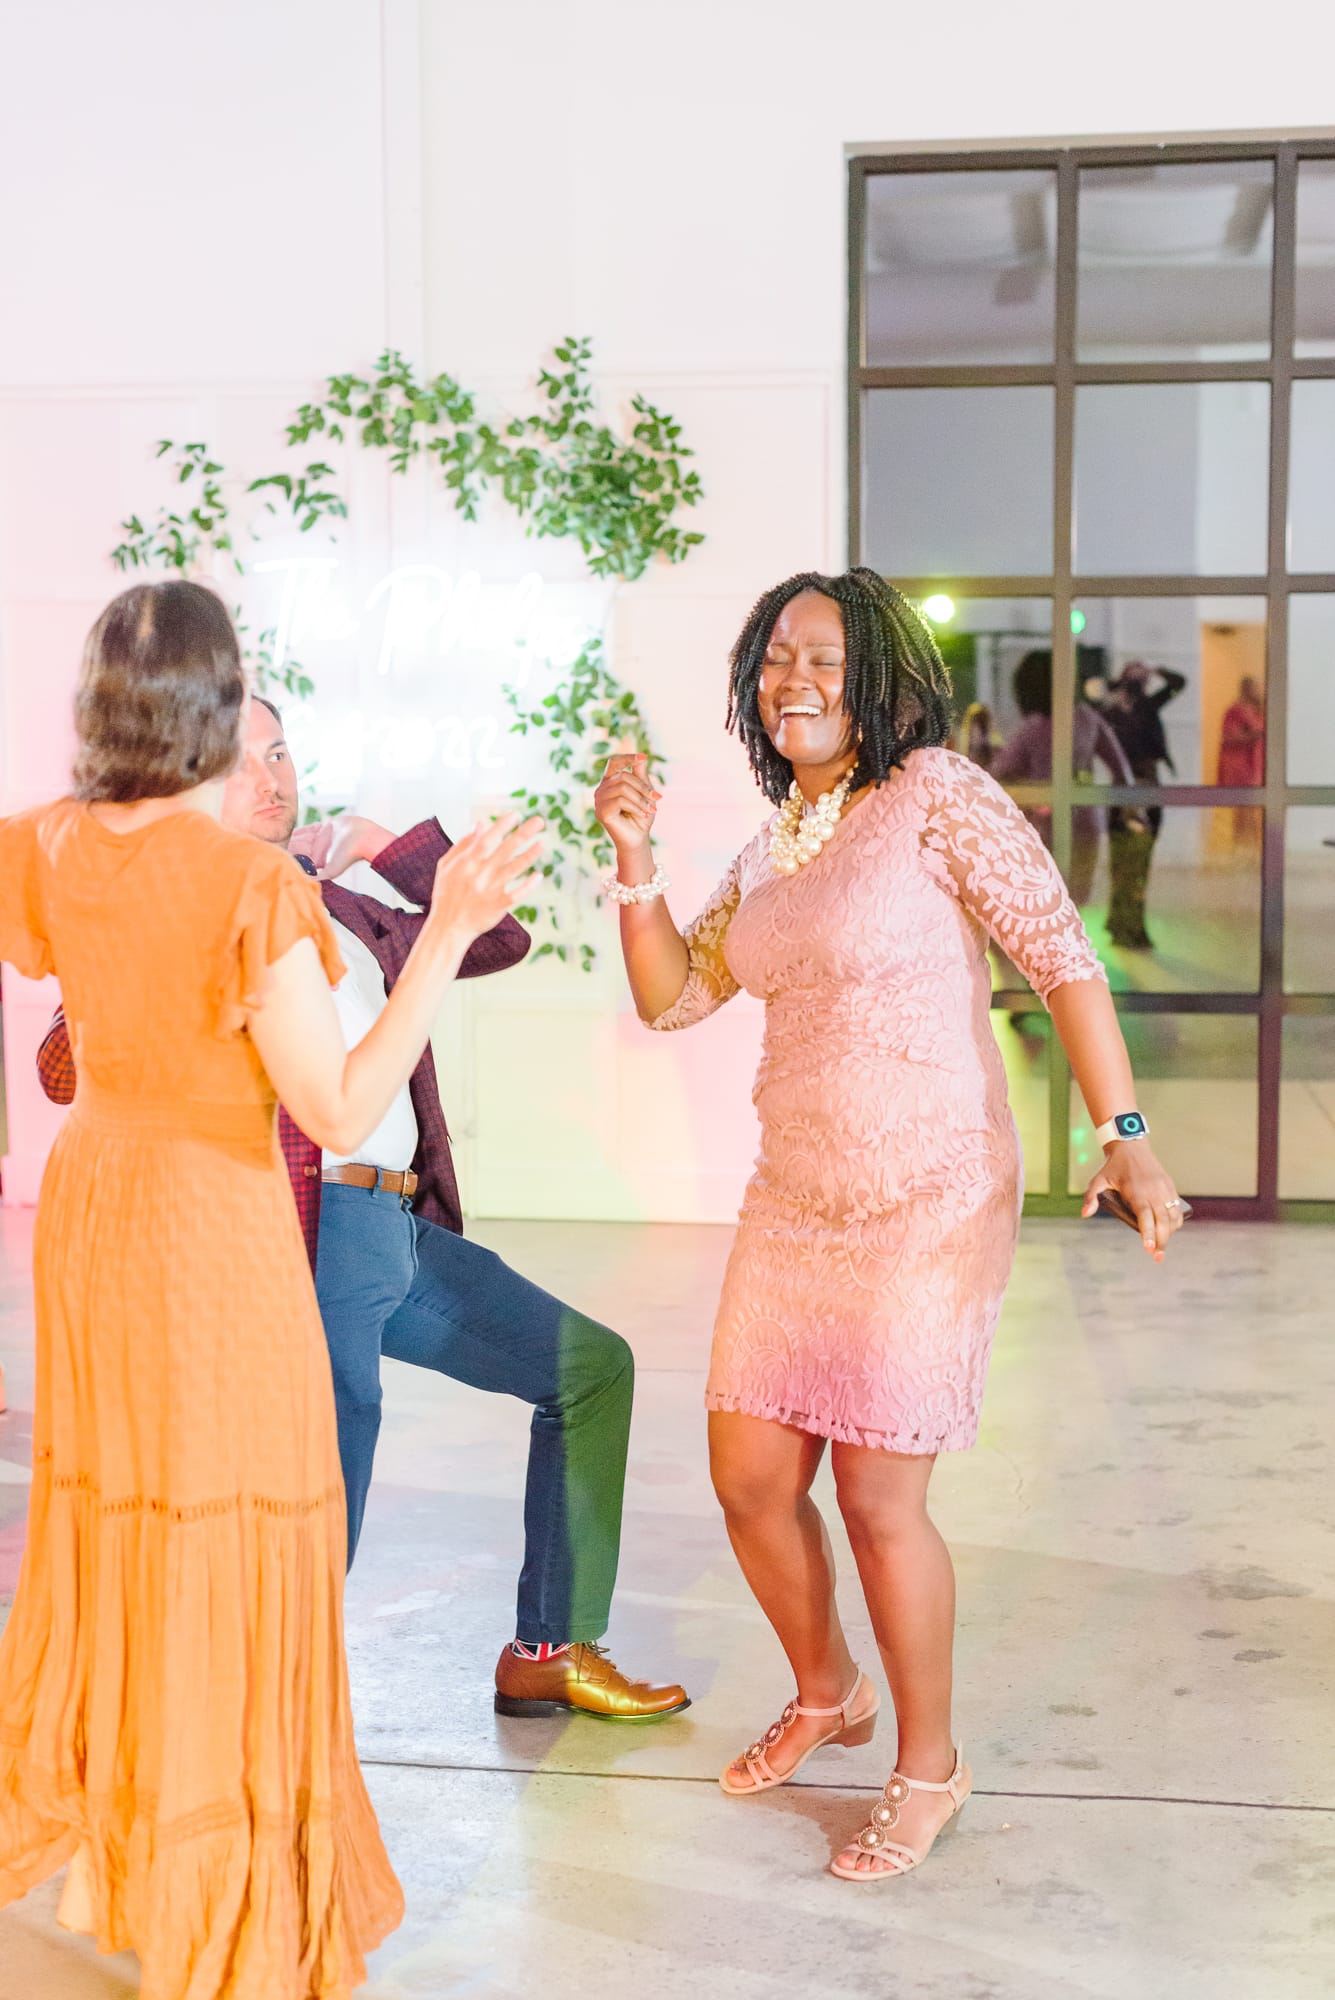 Guests have a great time on the dance floor at the Distillery after this lovely Garner wedding in NC.